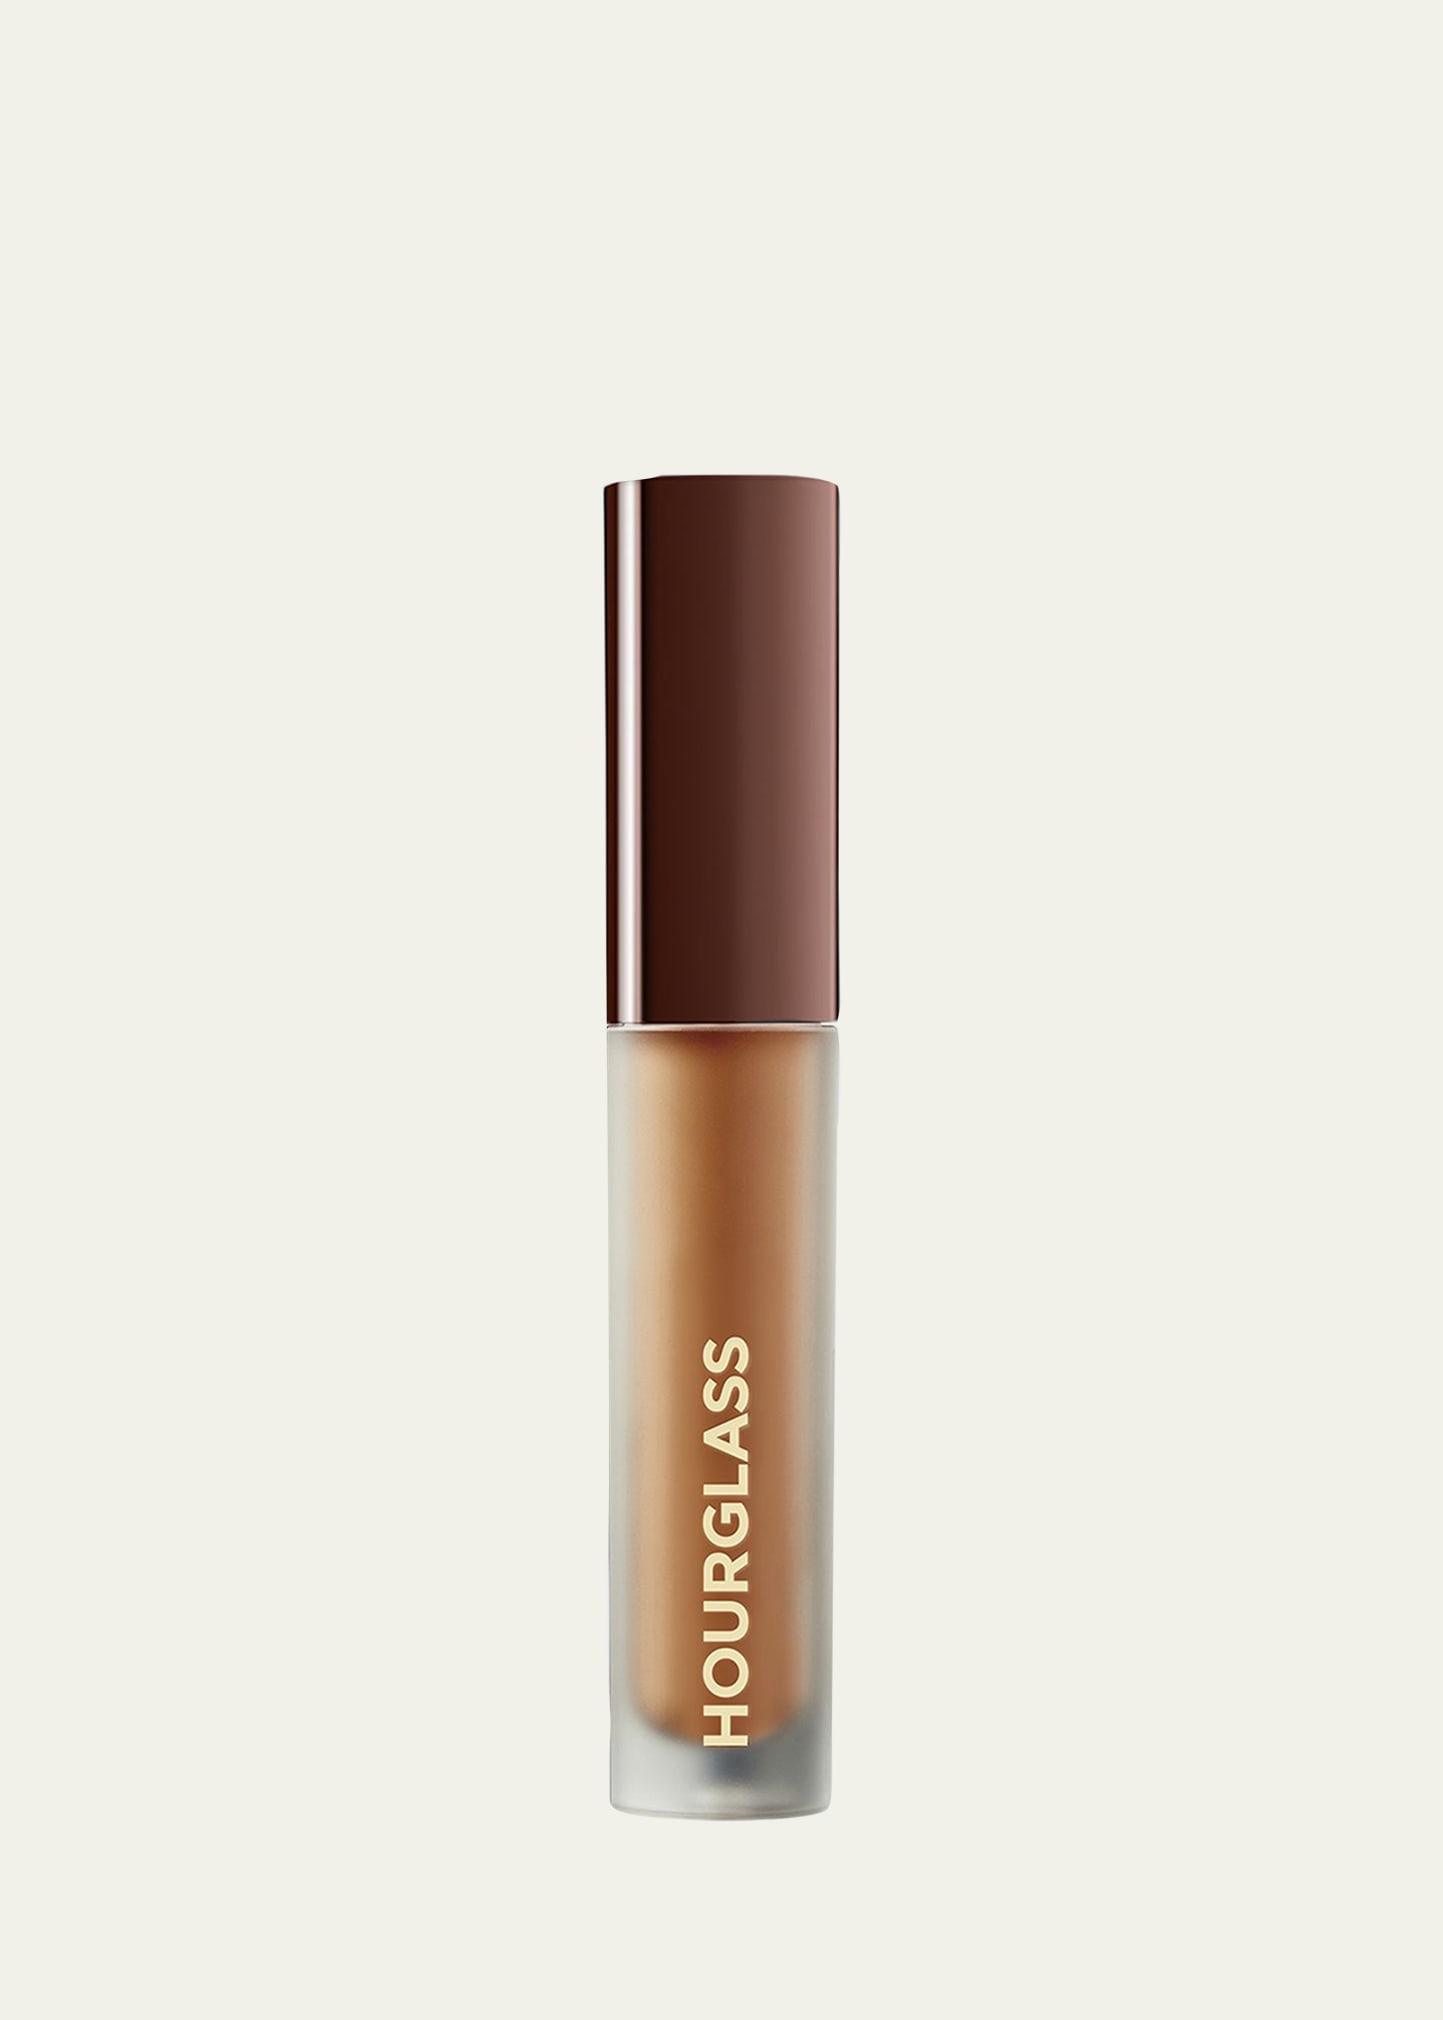 Hourglass Vanish Airbrush Concealer - Travel Size In Maple 8.5